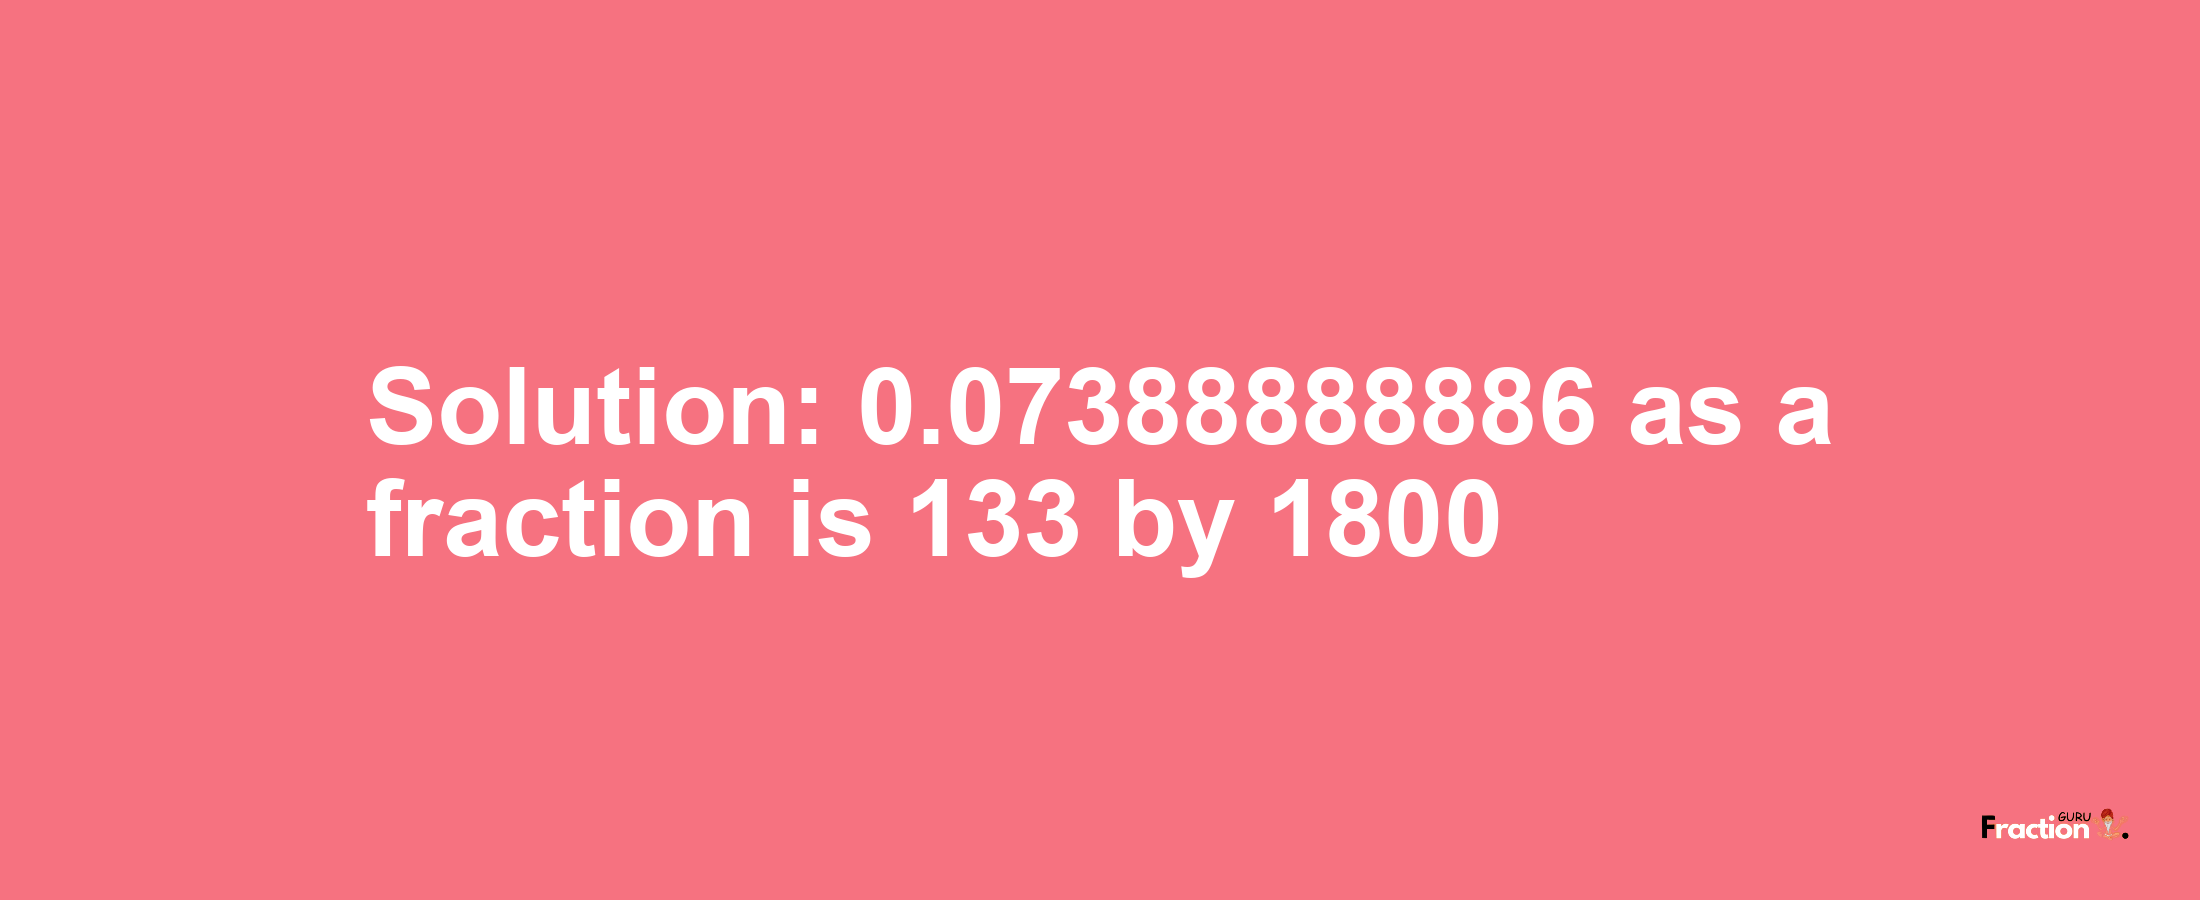 Solution:0.07388888886 as a fraction is 133/1800